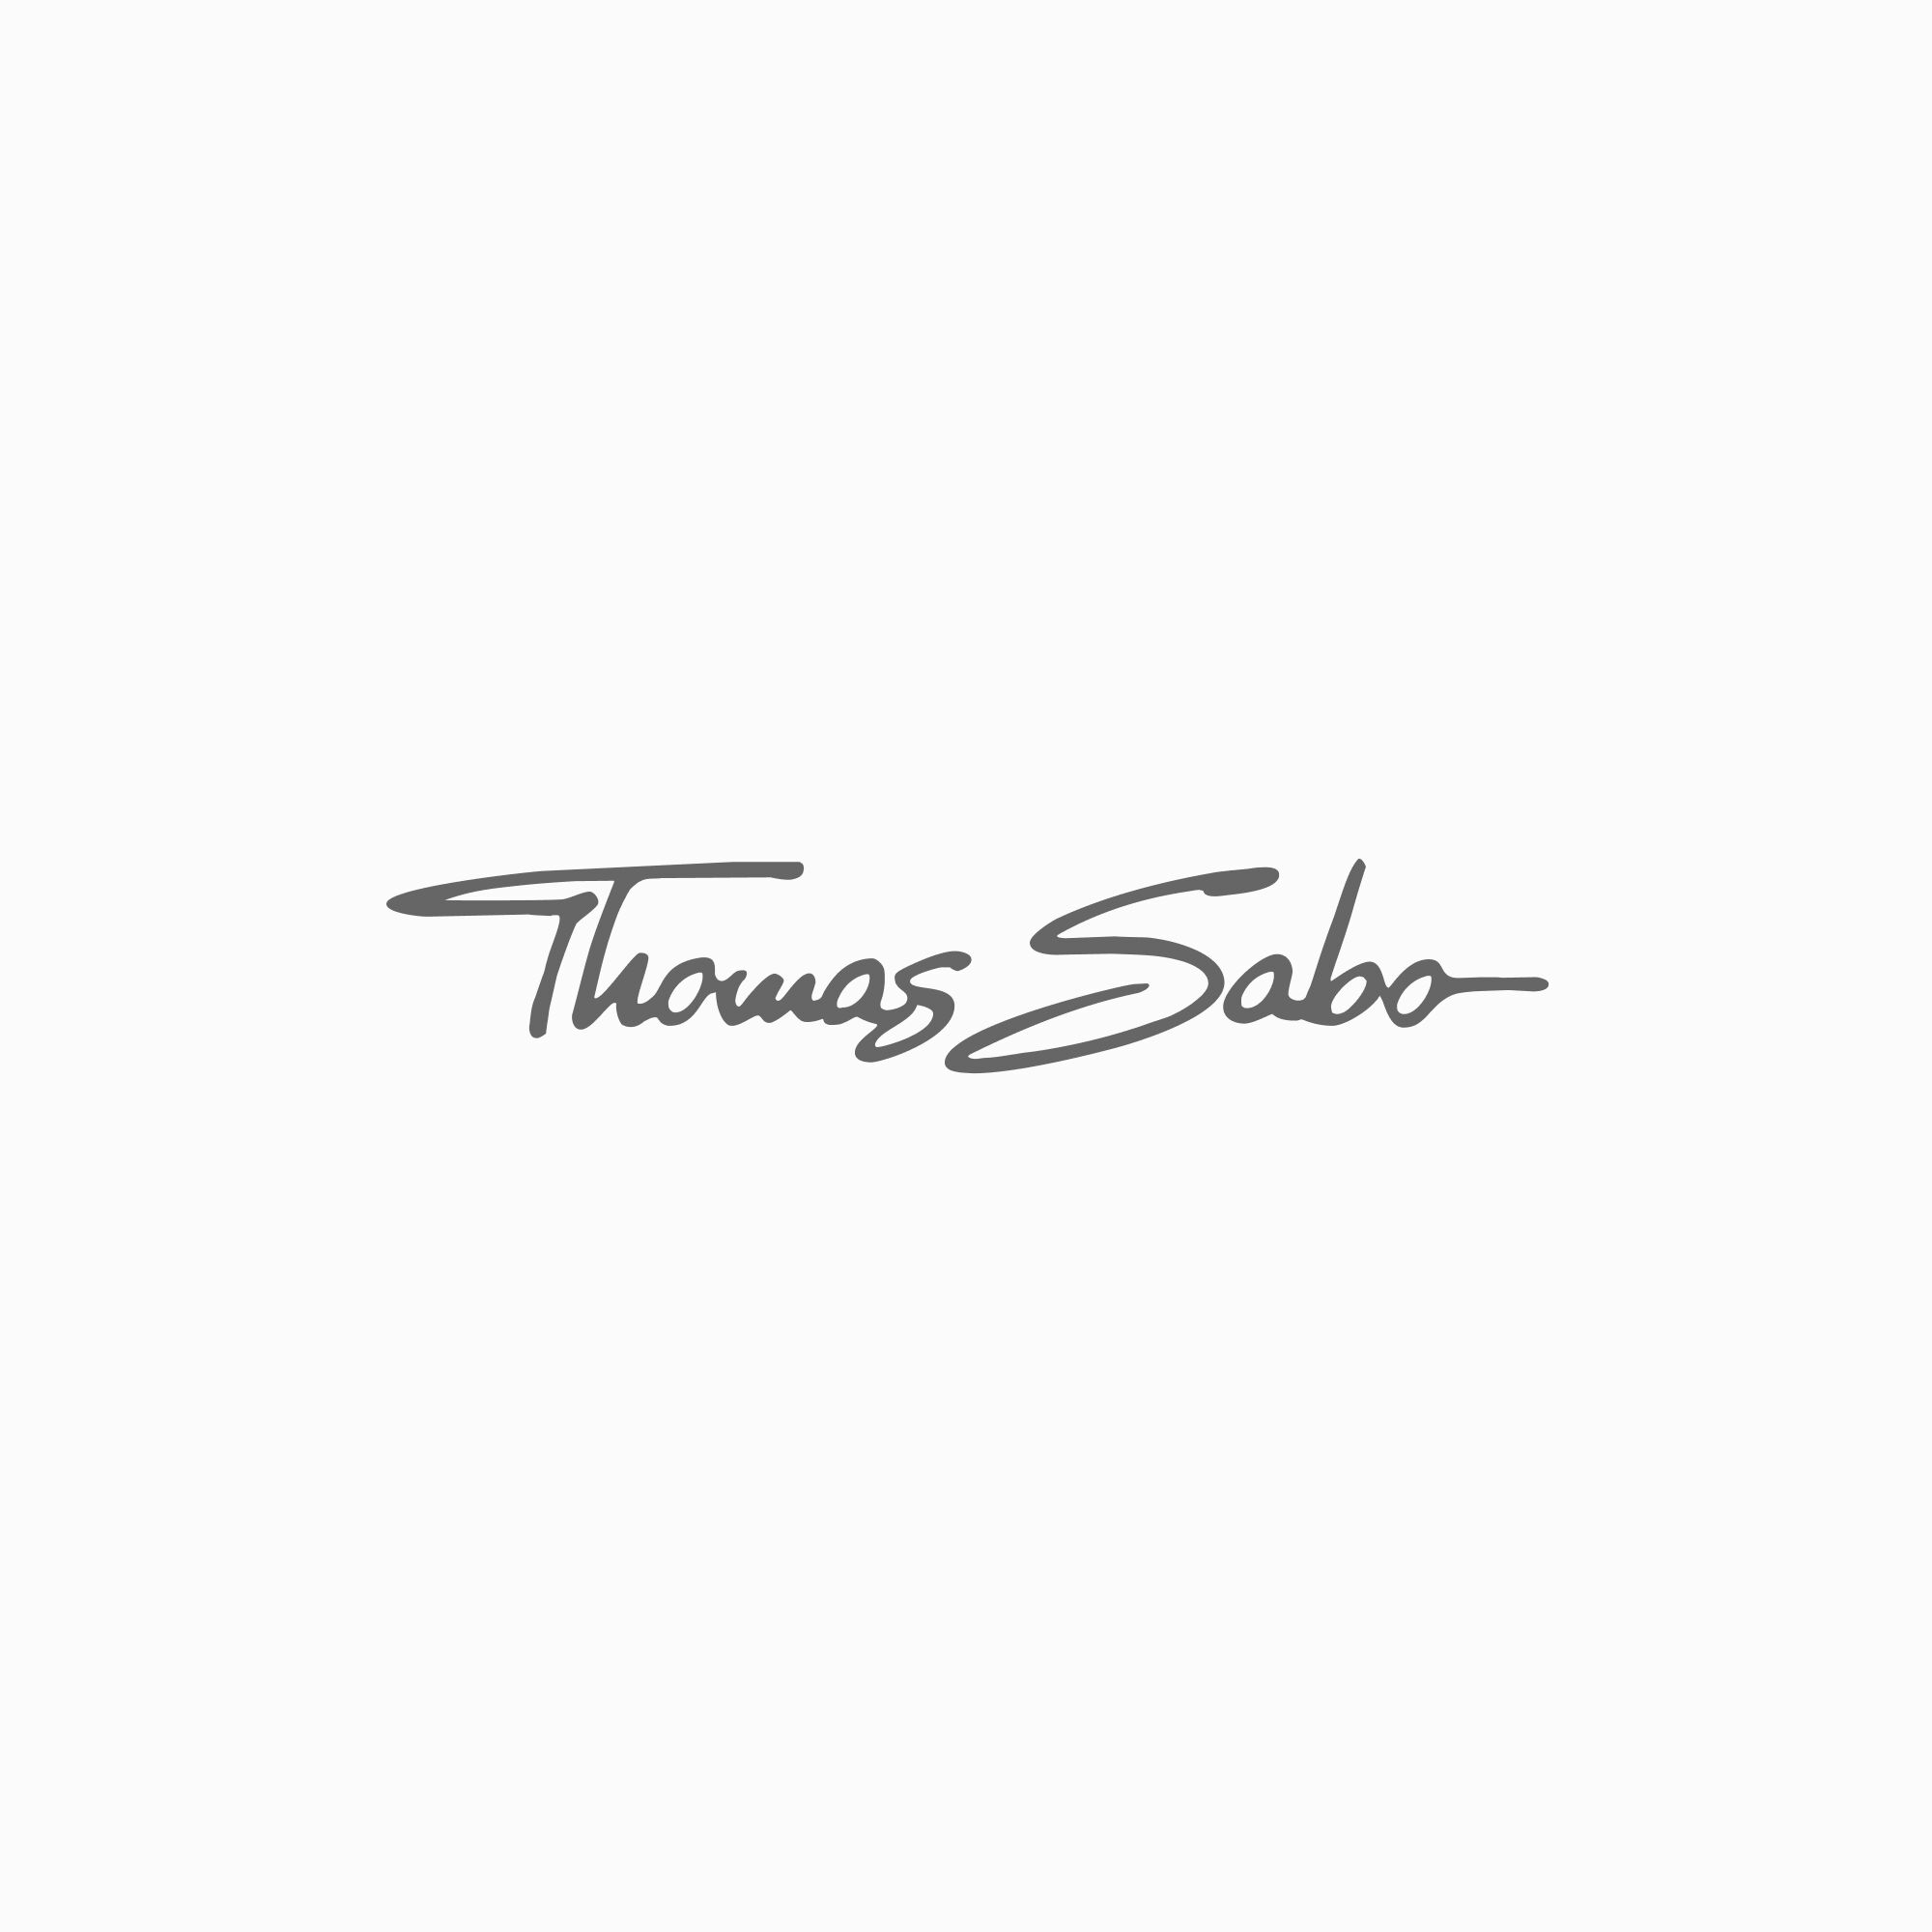 Giftcard from the  collection in the THOMAS SABO online store